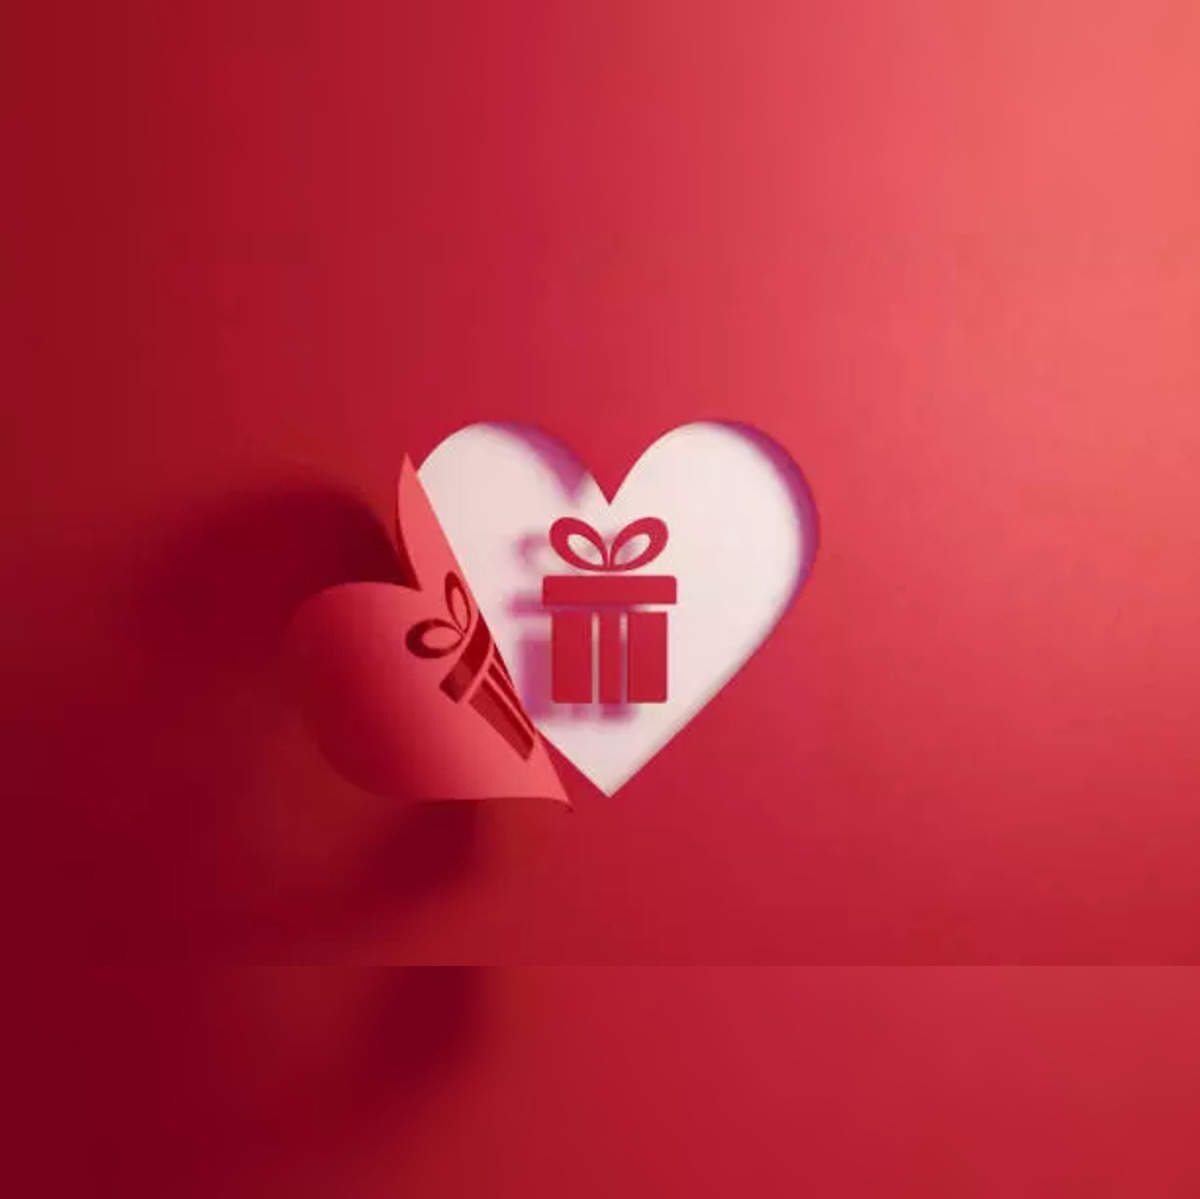 Heart Love Symbol Gift in Jewelry Box Valentine Stock Photo - Image of  open, gift: 12337182